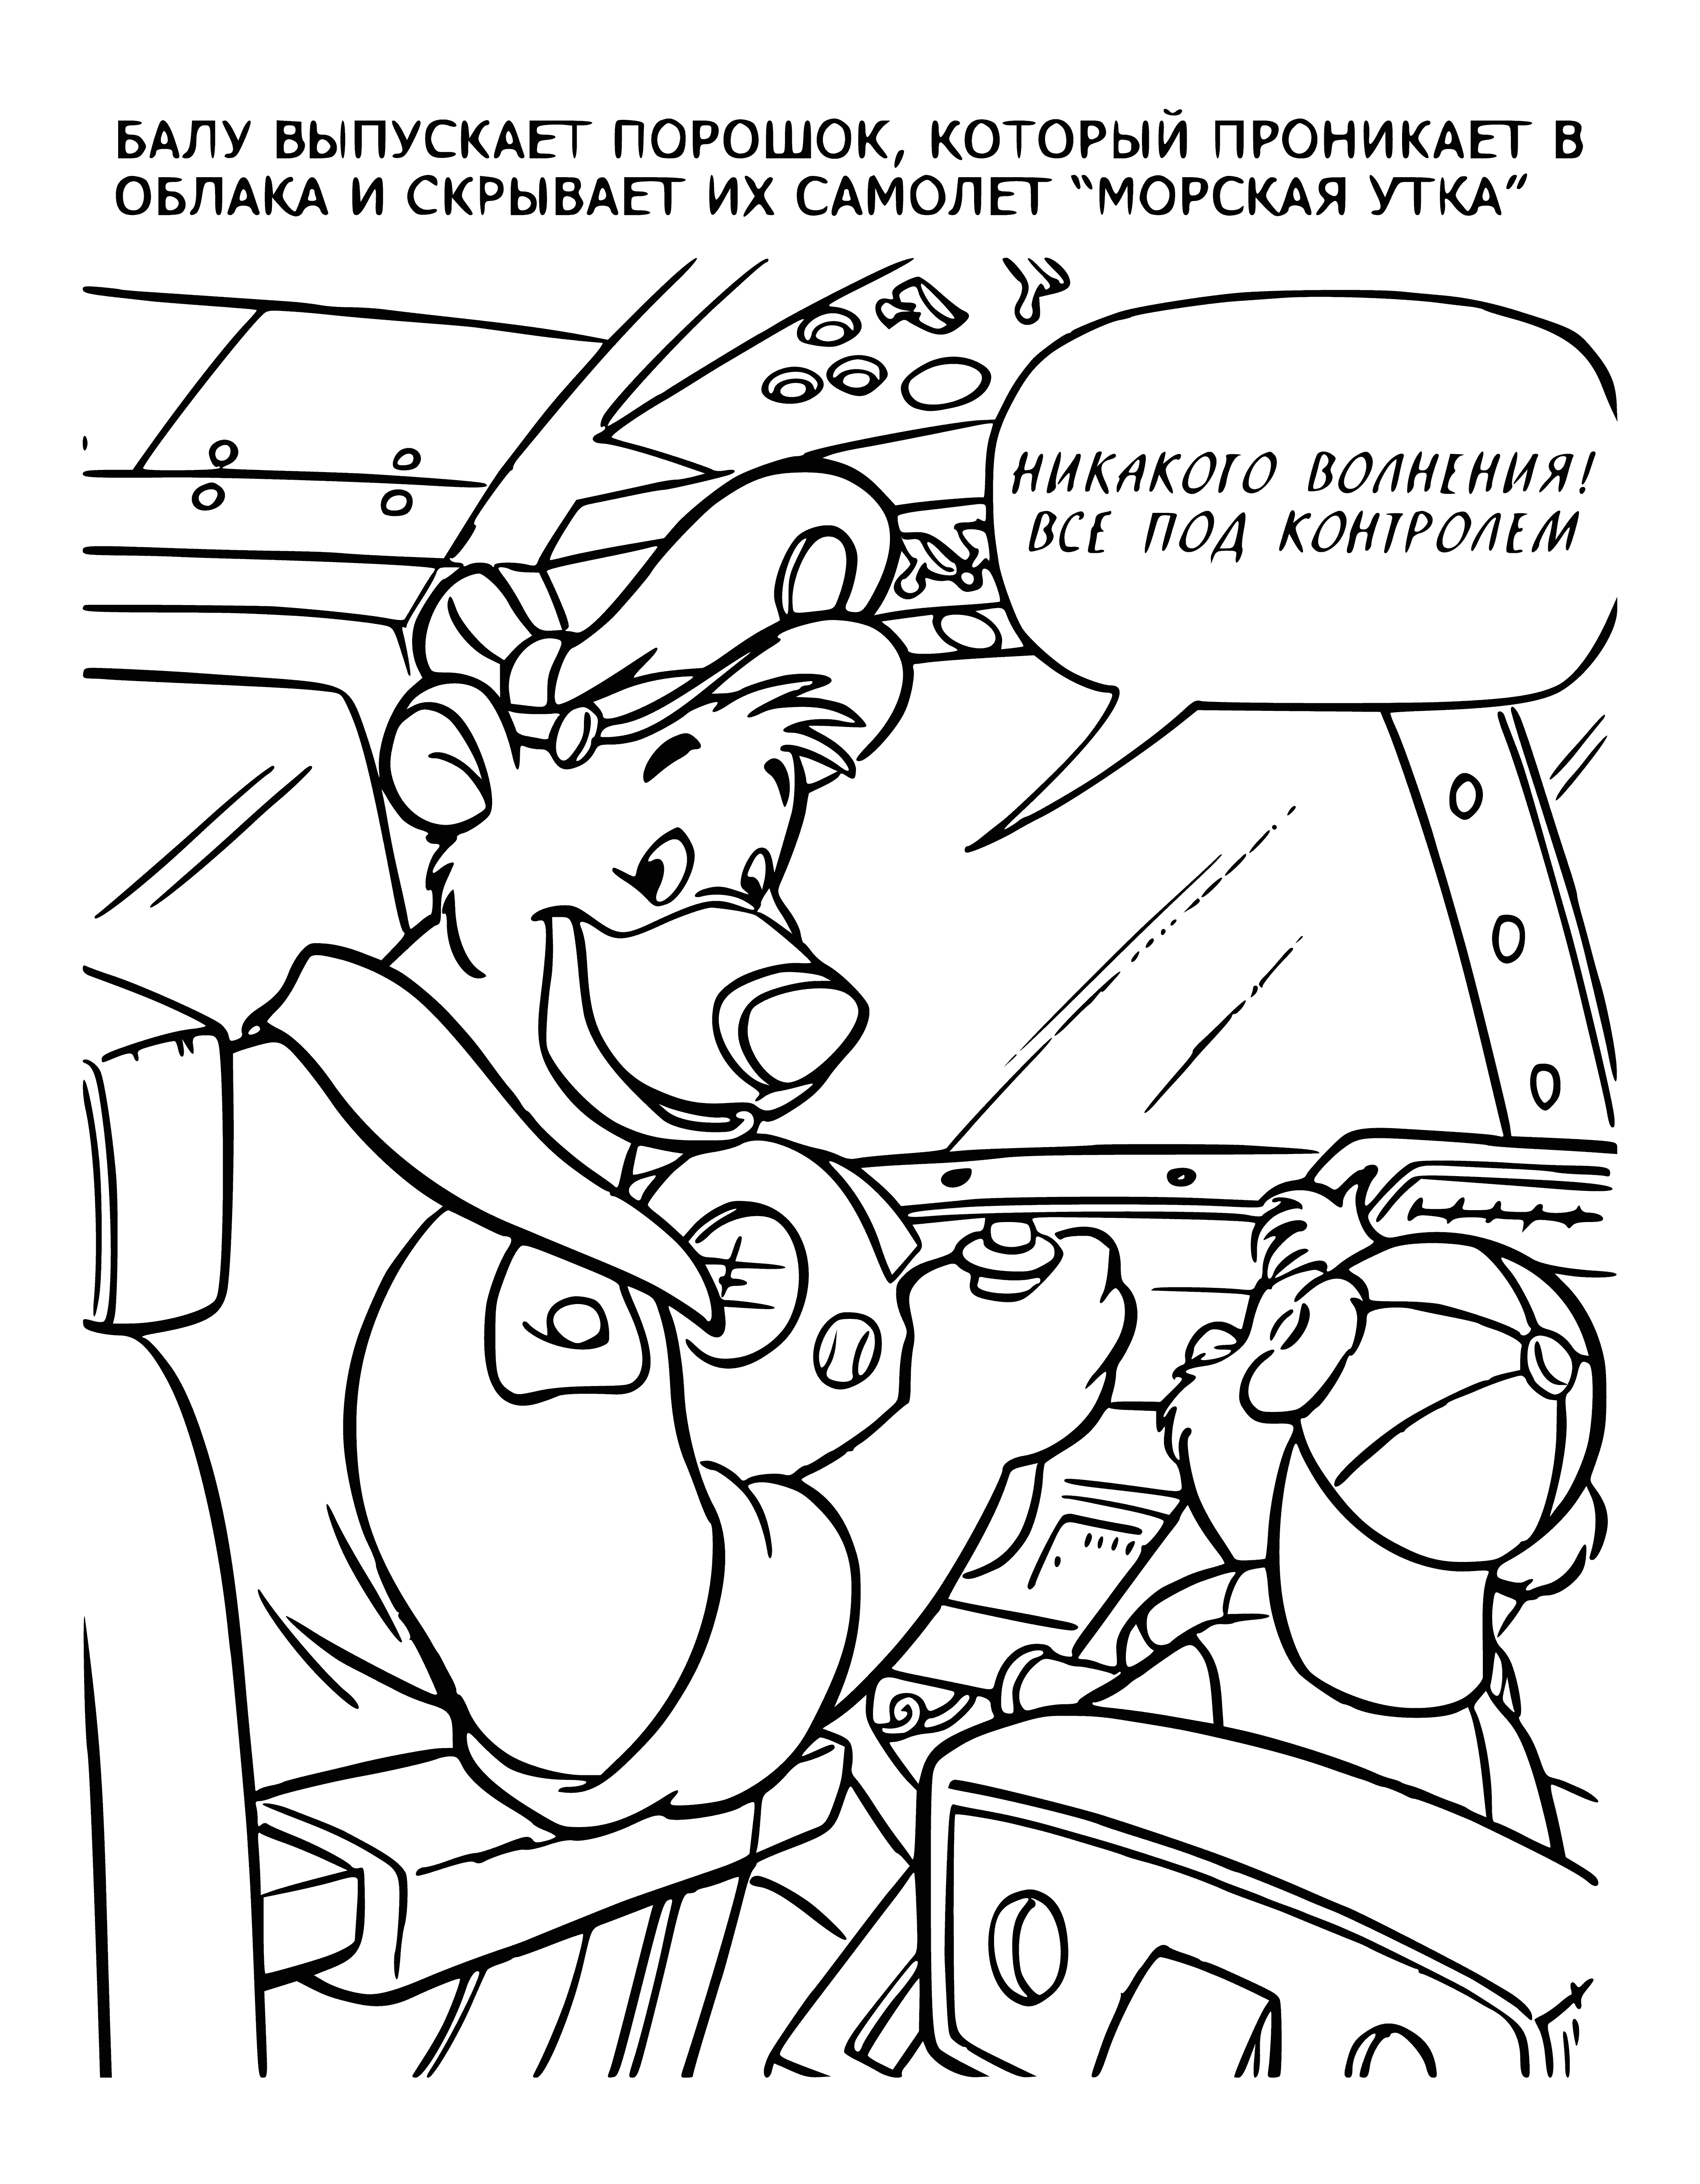 Baloo has prepared a surprise coloring page